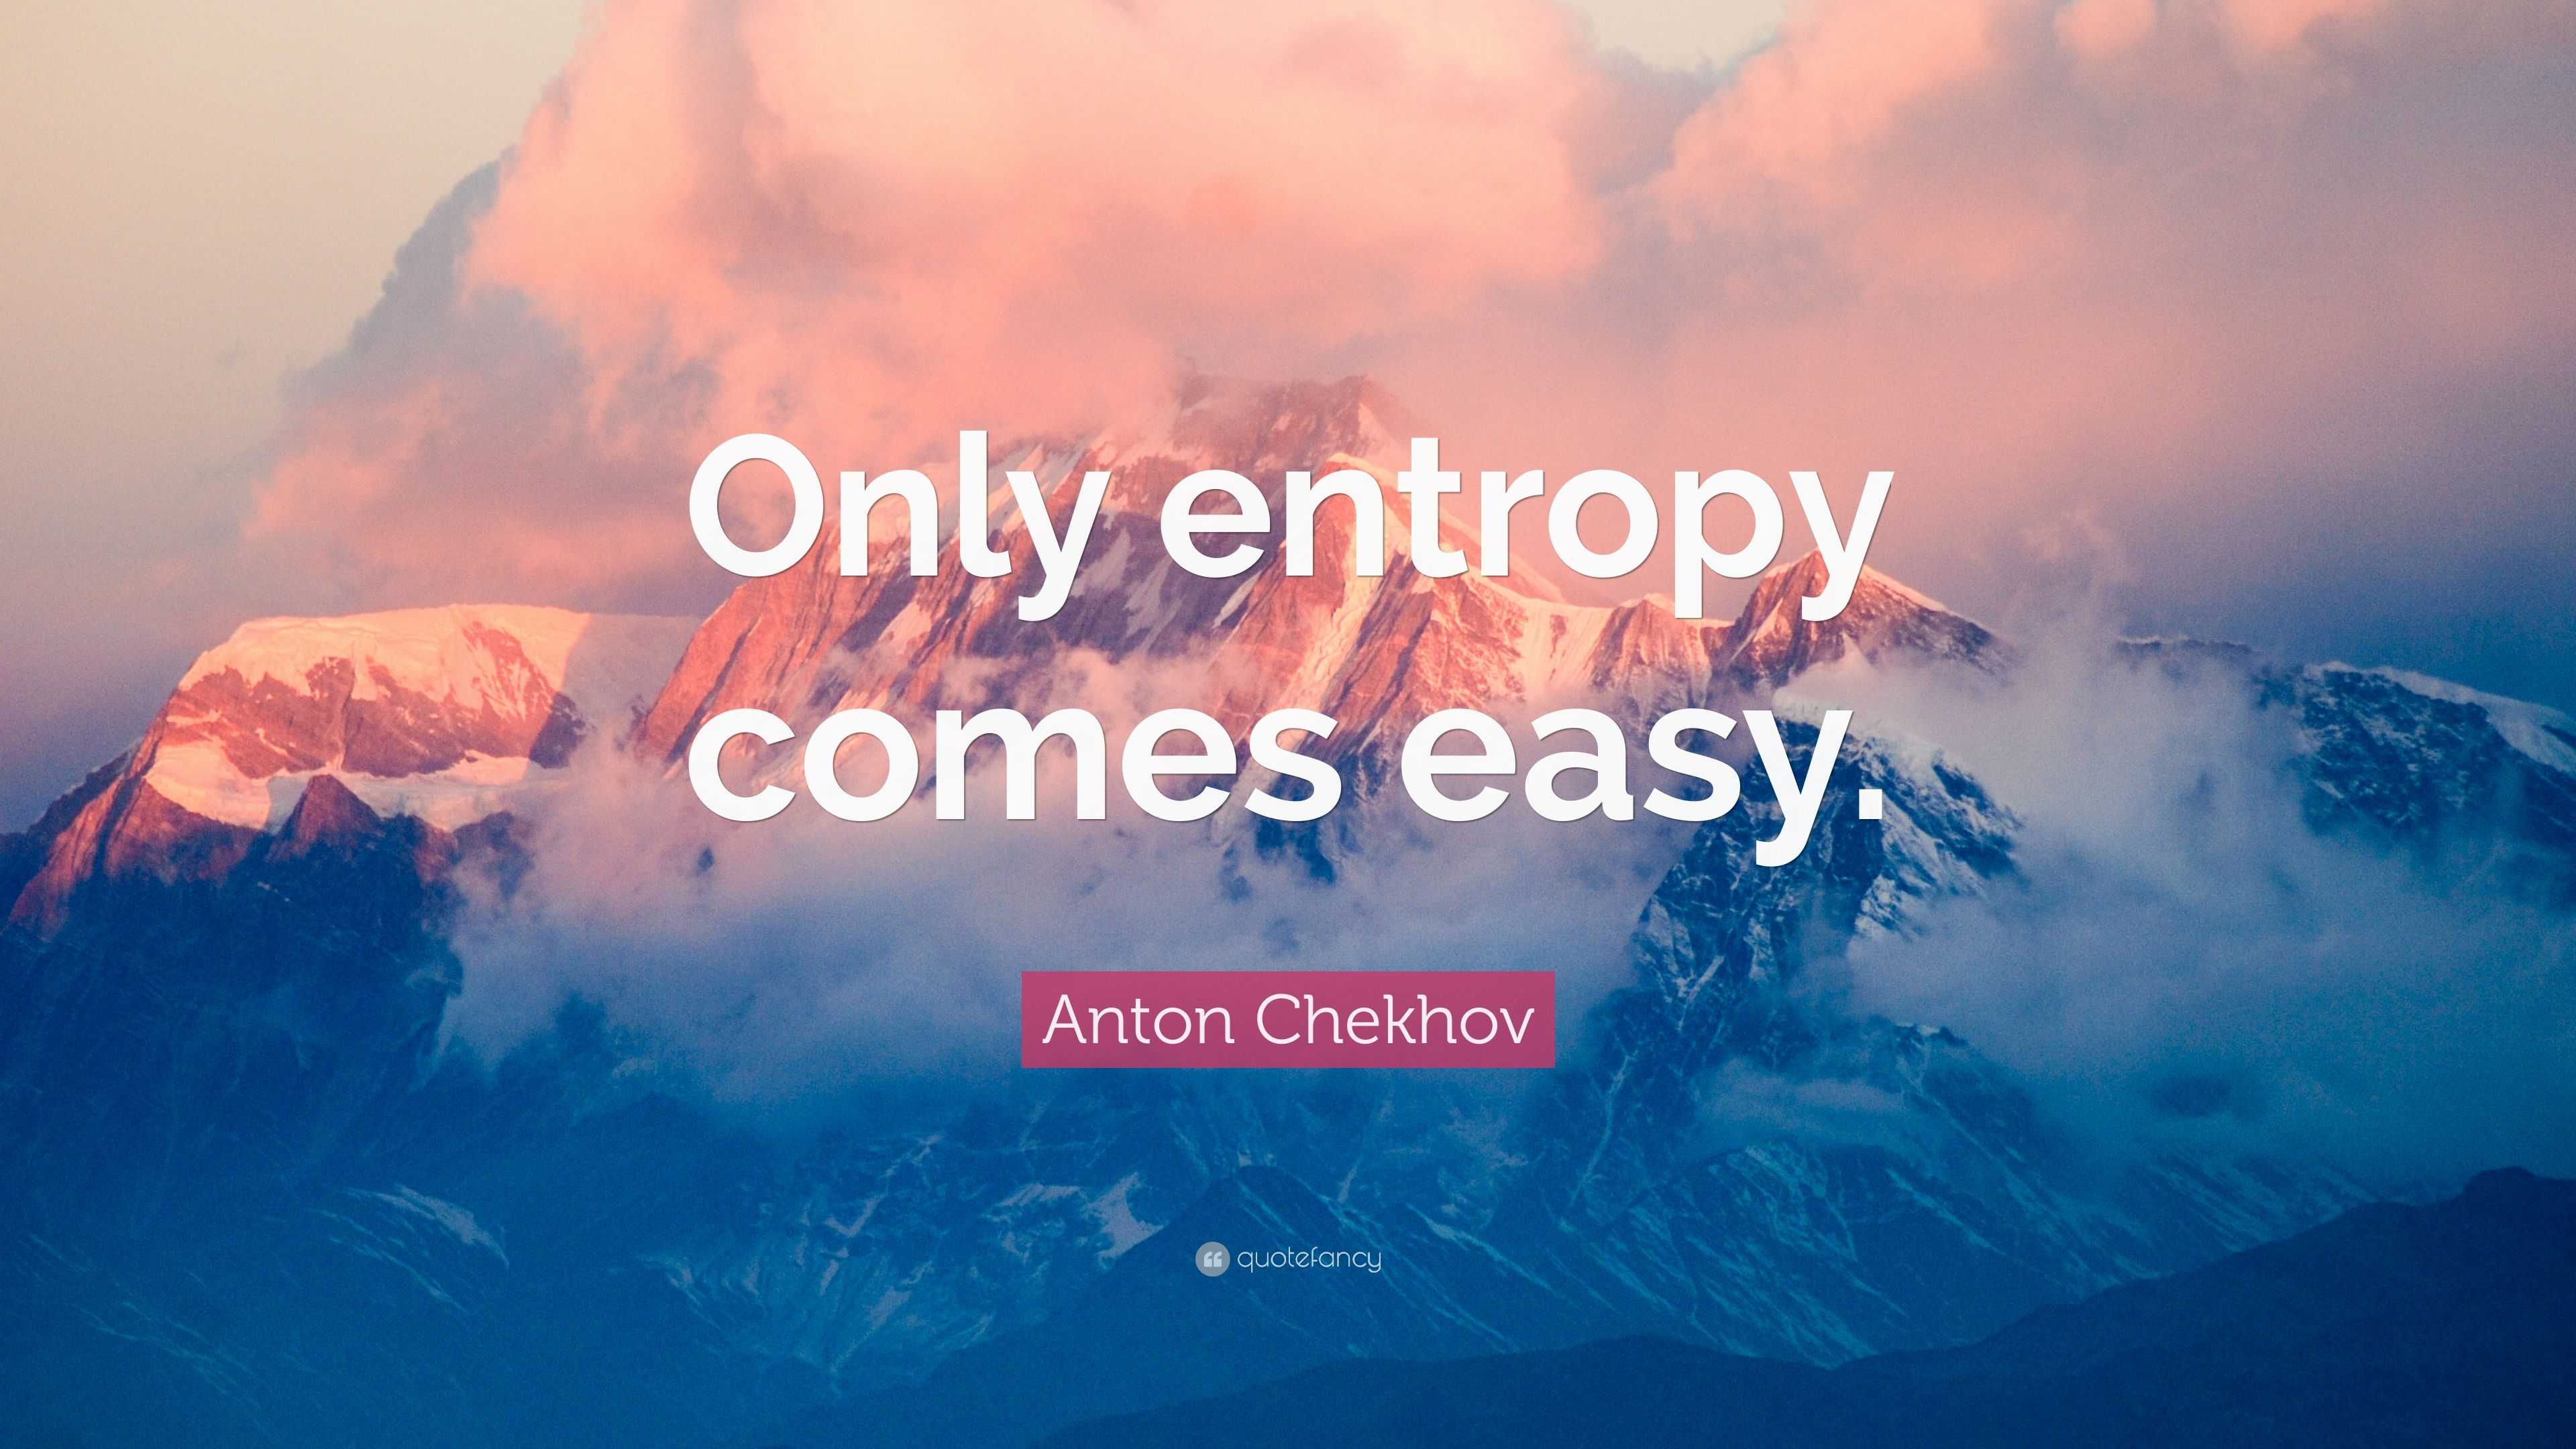 Anton Chekhov Quote: “Only entropy comes easy.” (12 wallpapers) - Quotefancy